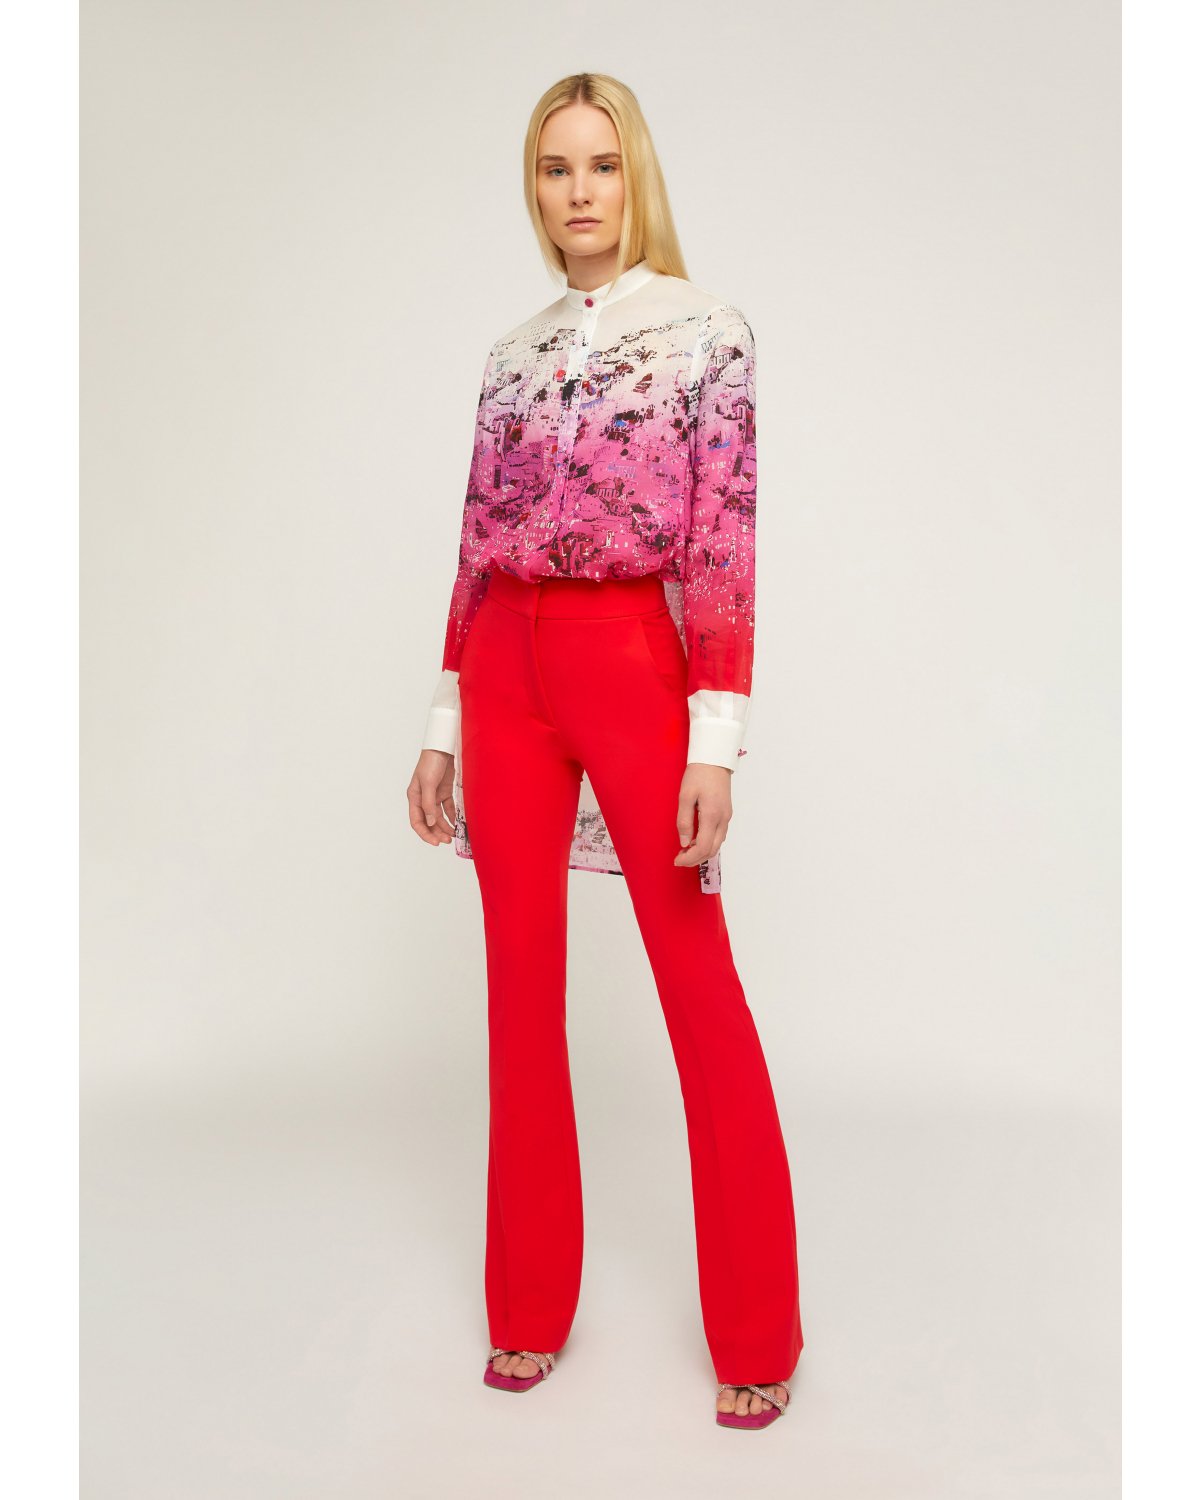 Red tight flared trousers | 73_74 | Genny